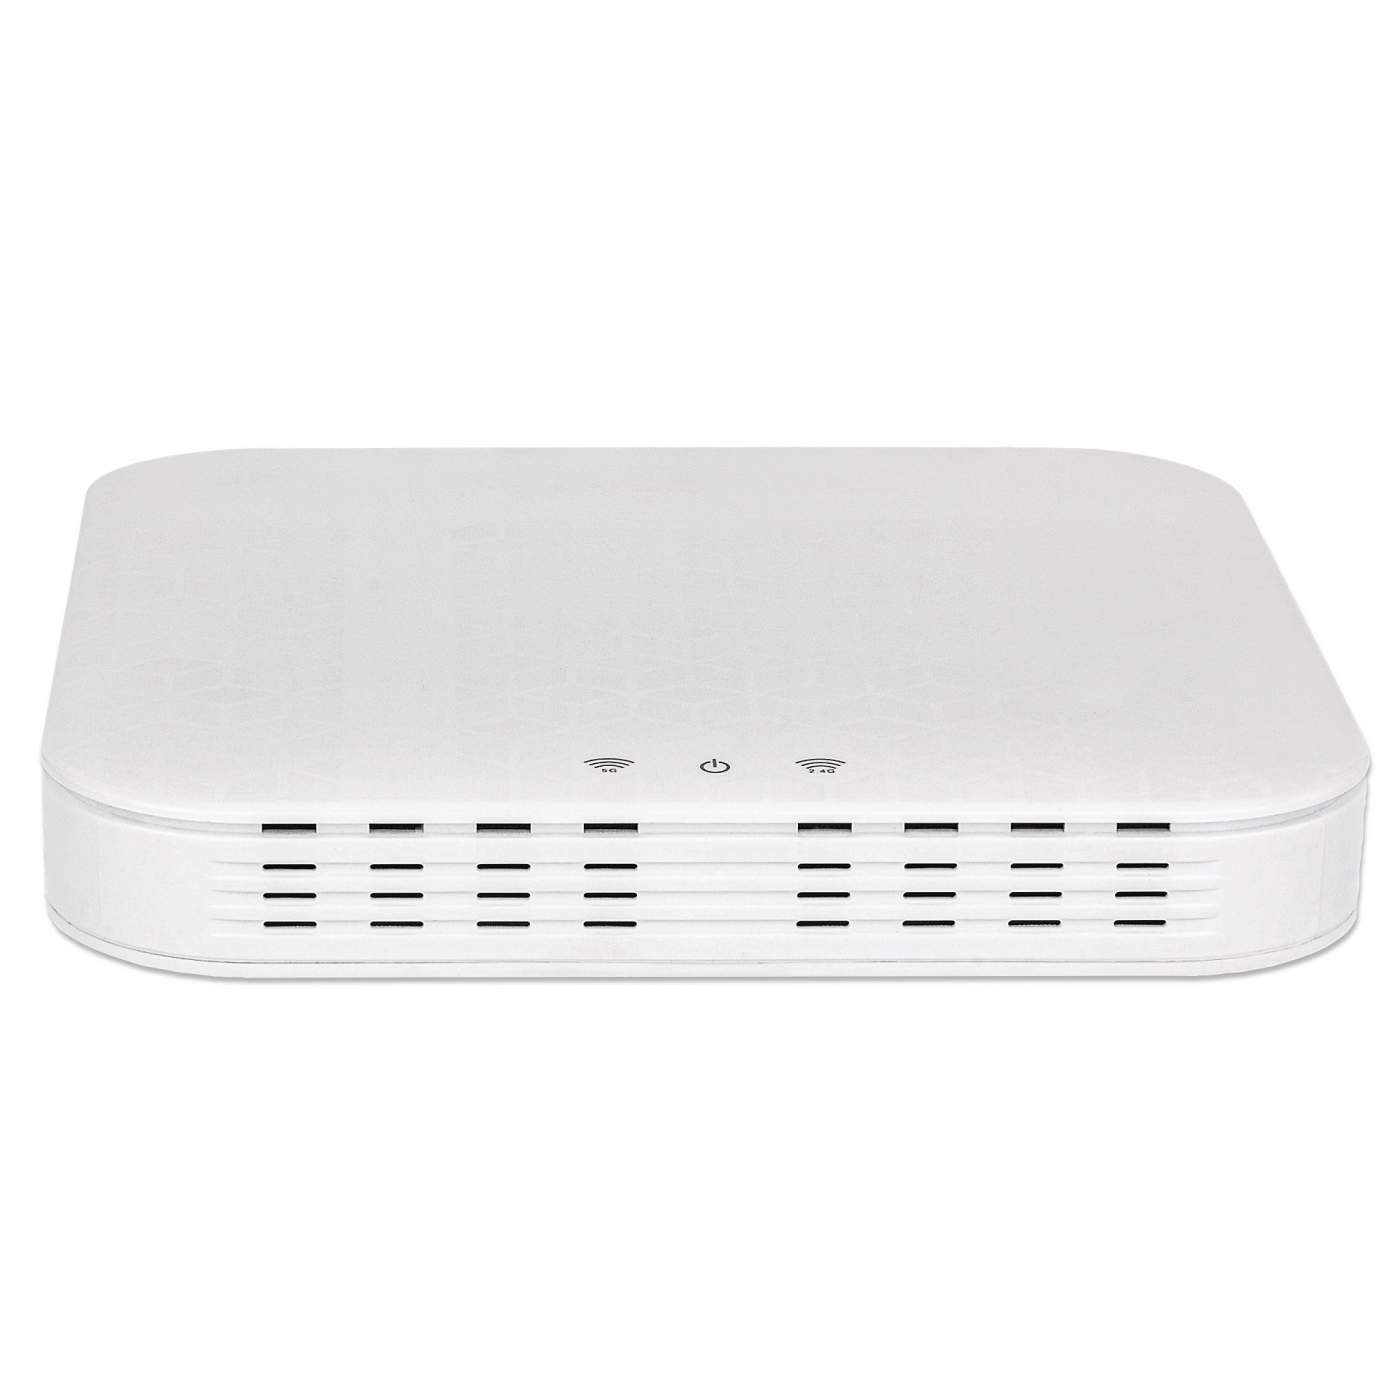 Manageable Wireless AC1300 Dual-Band Gigabit PoE Indoor Access Point and Router Image 3